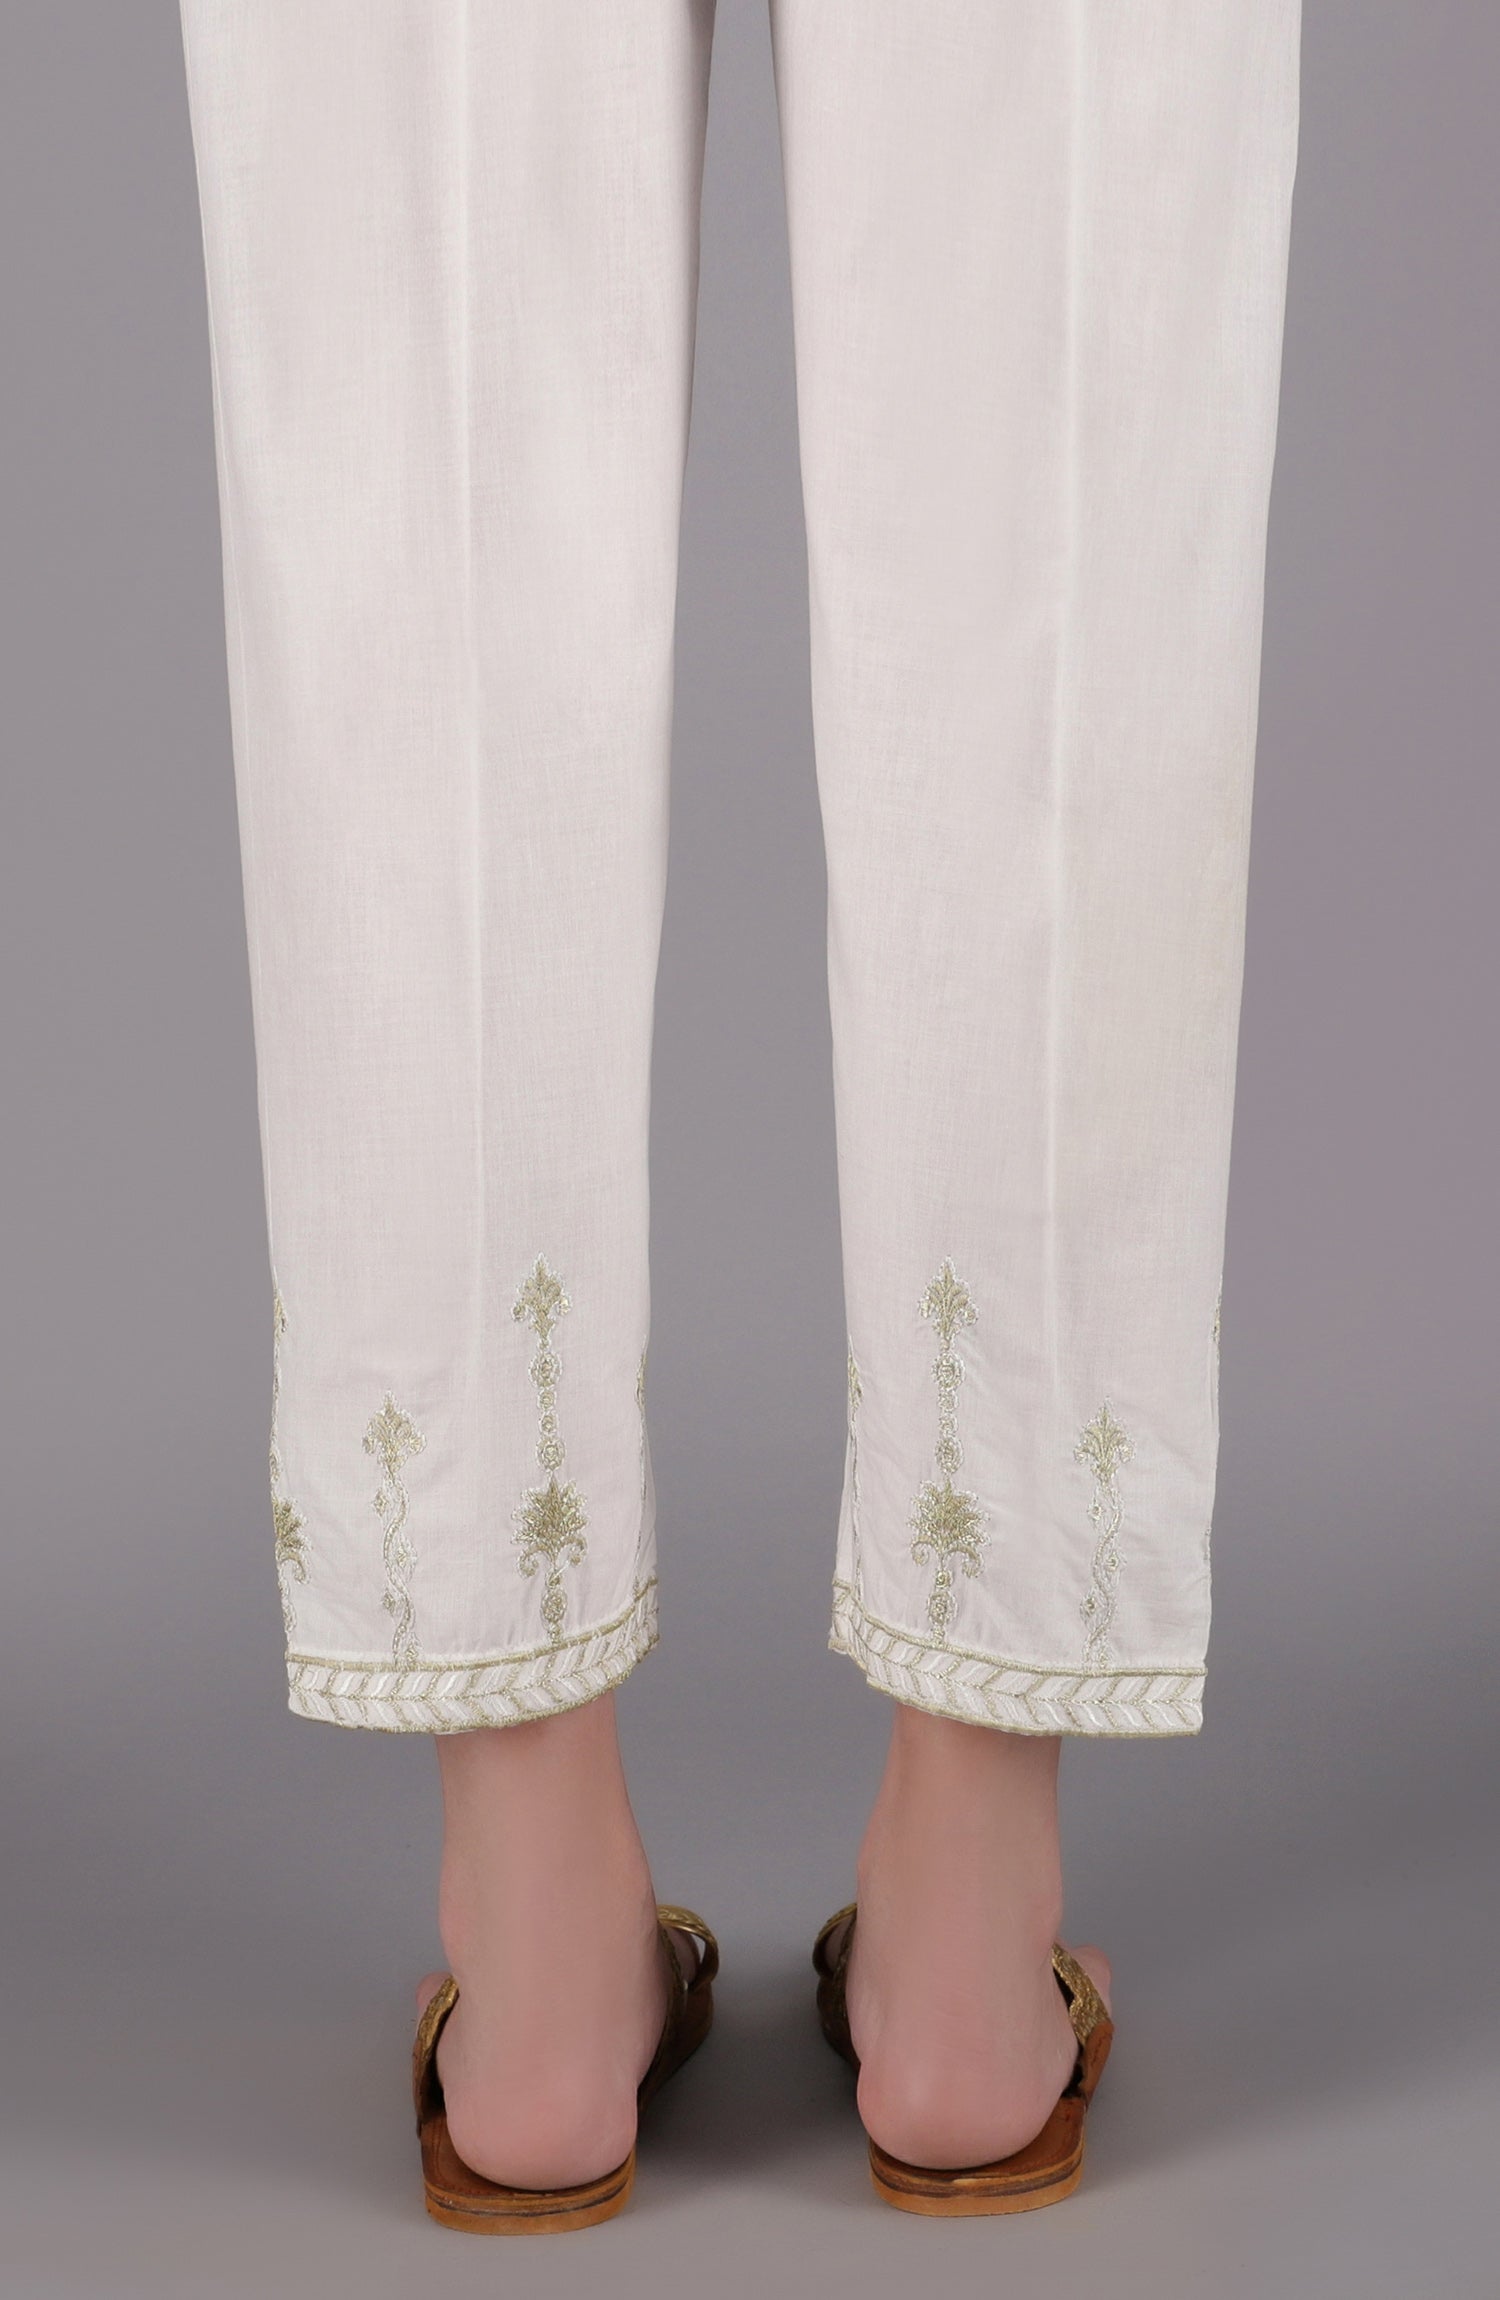 NRPE-51/S WHITE CAMBRIC SCPANTS STITCHED BOTTOMS PANTS